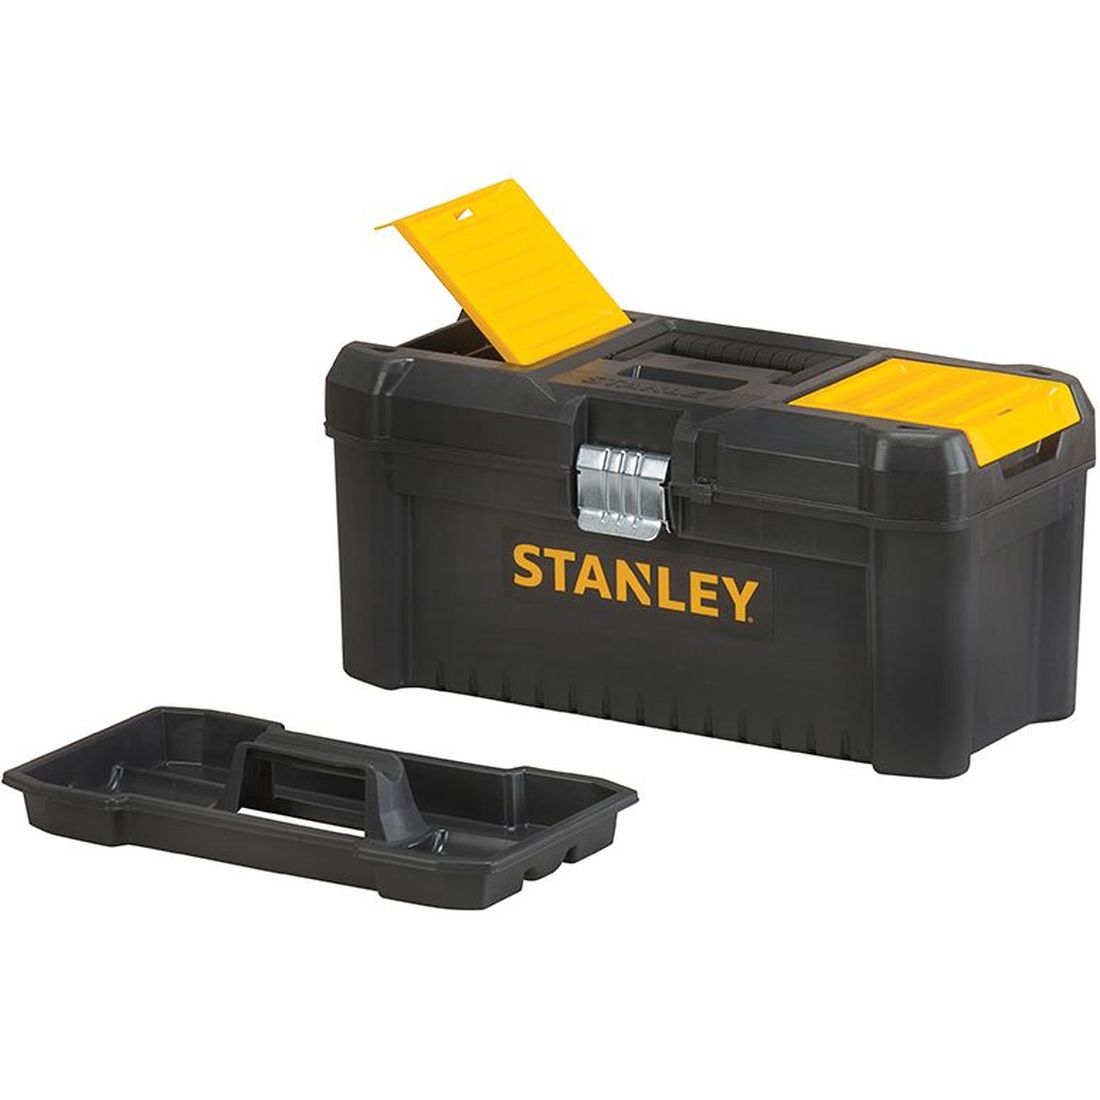 STANLEY Basic Toolbox with Organiser Top 41cm (16in)                                    